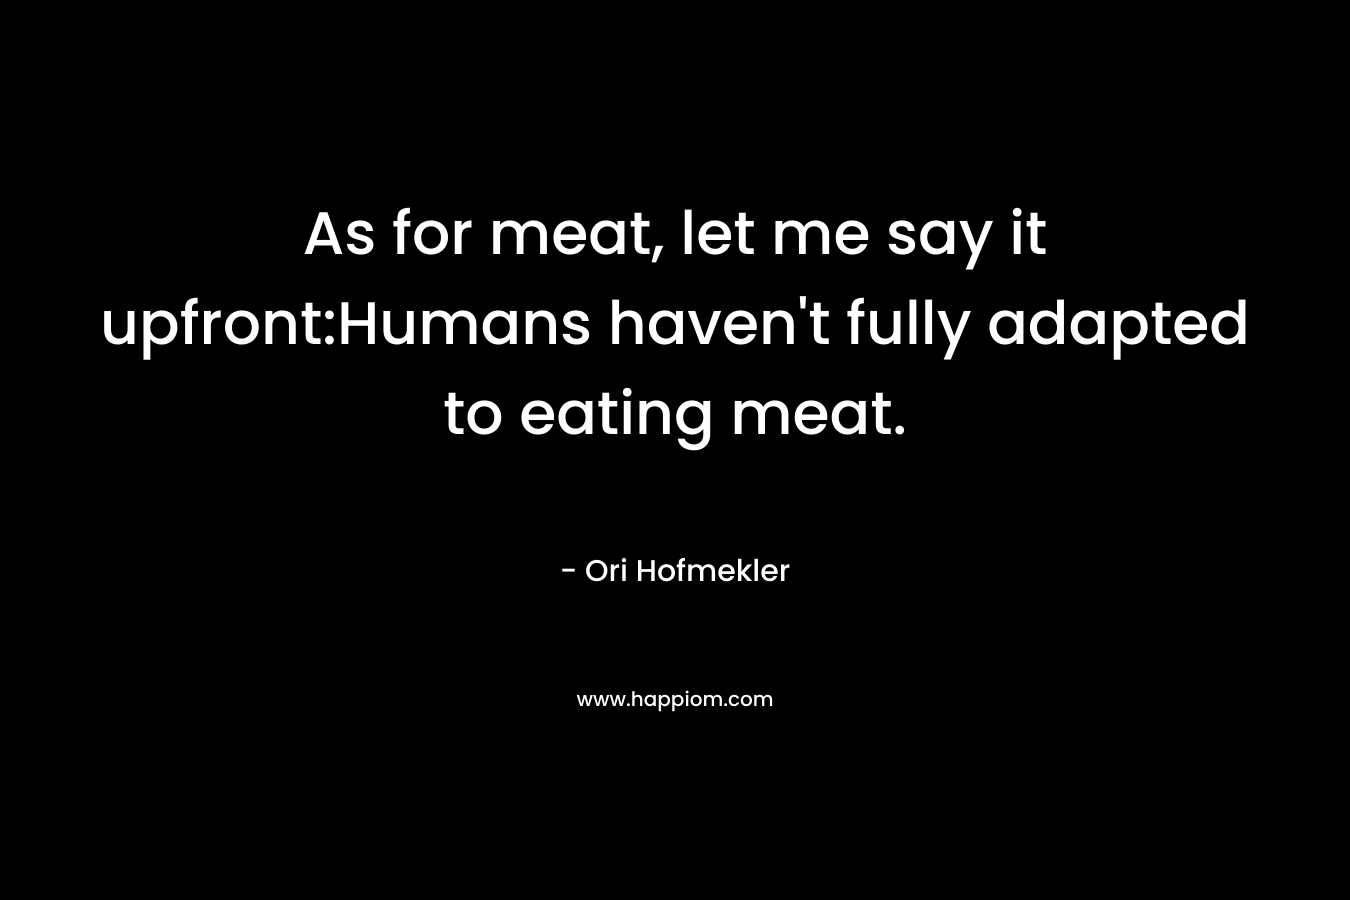 As for meat, let me say it upfront:Humans haven't fully adapted to eating meat.